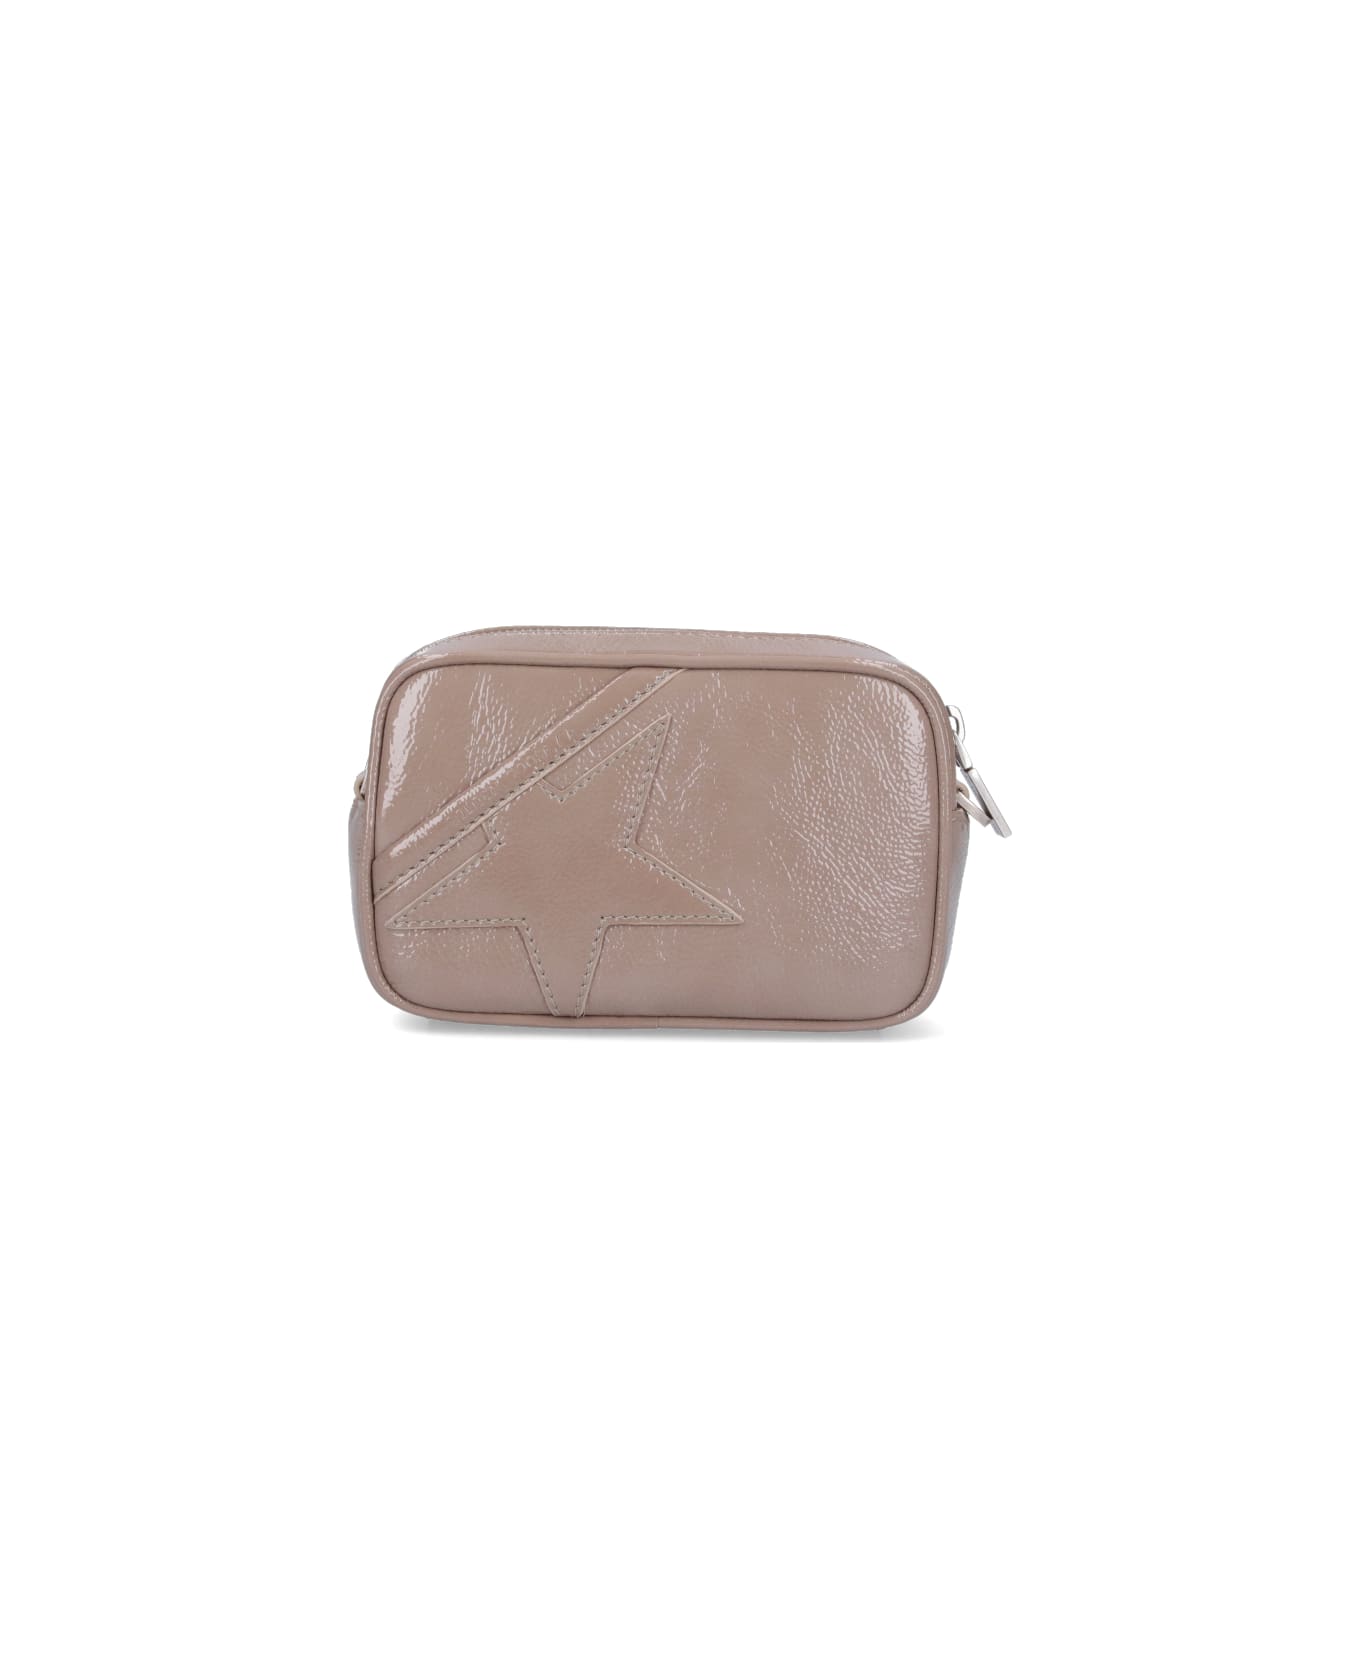 Golden Goose Star Crossbody Bag In Dove-gray Leather - Taupe クラッチバッグ